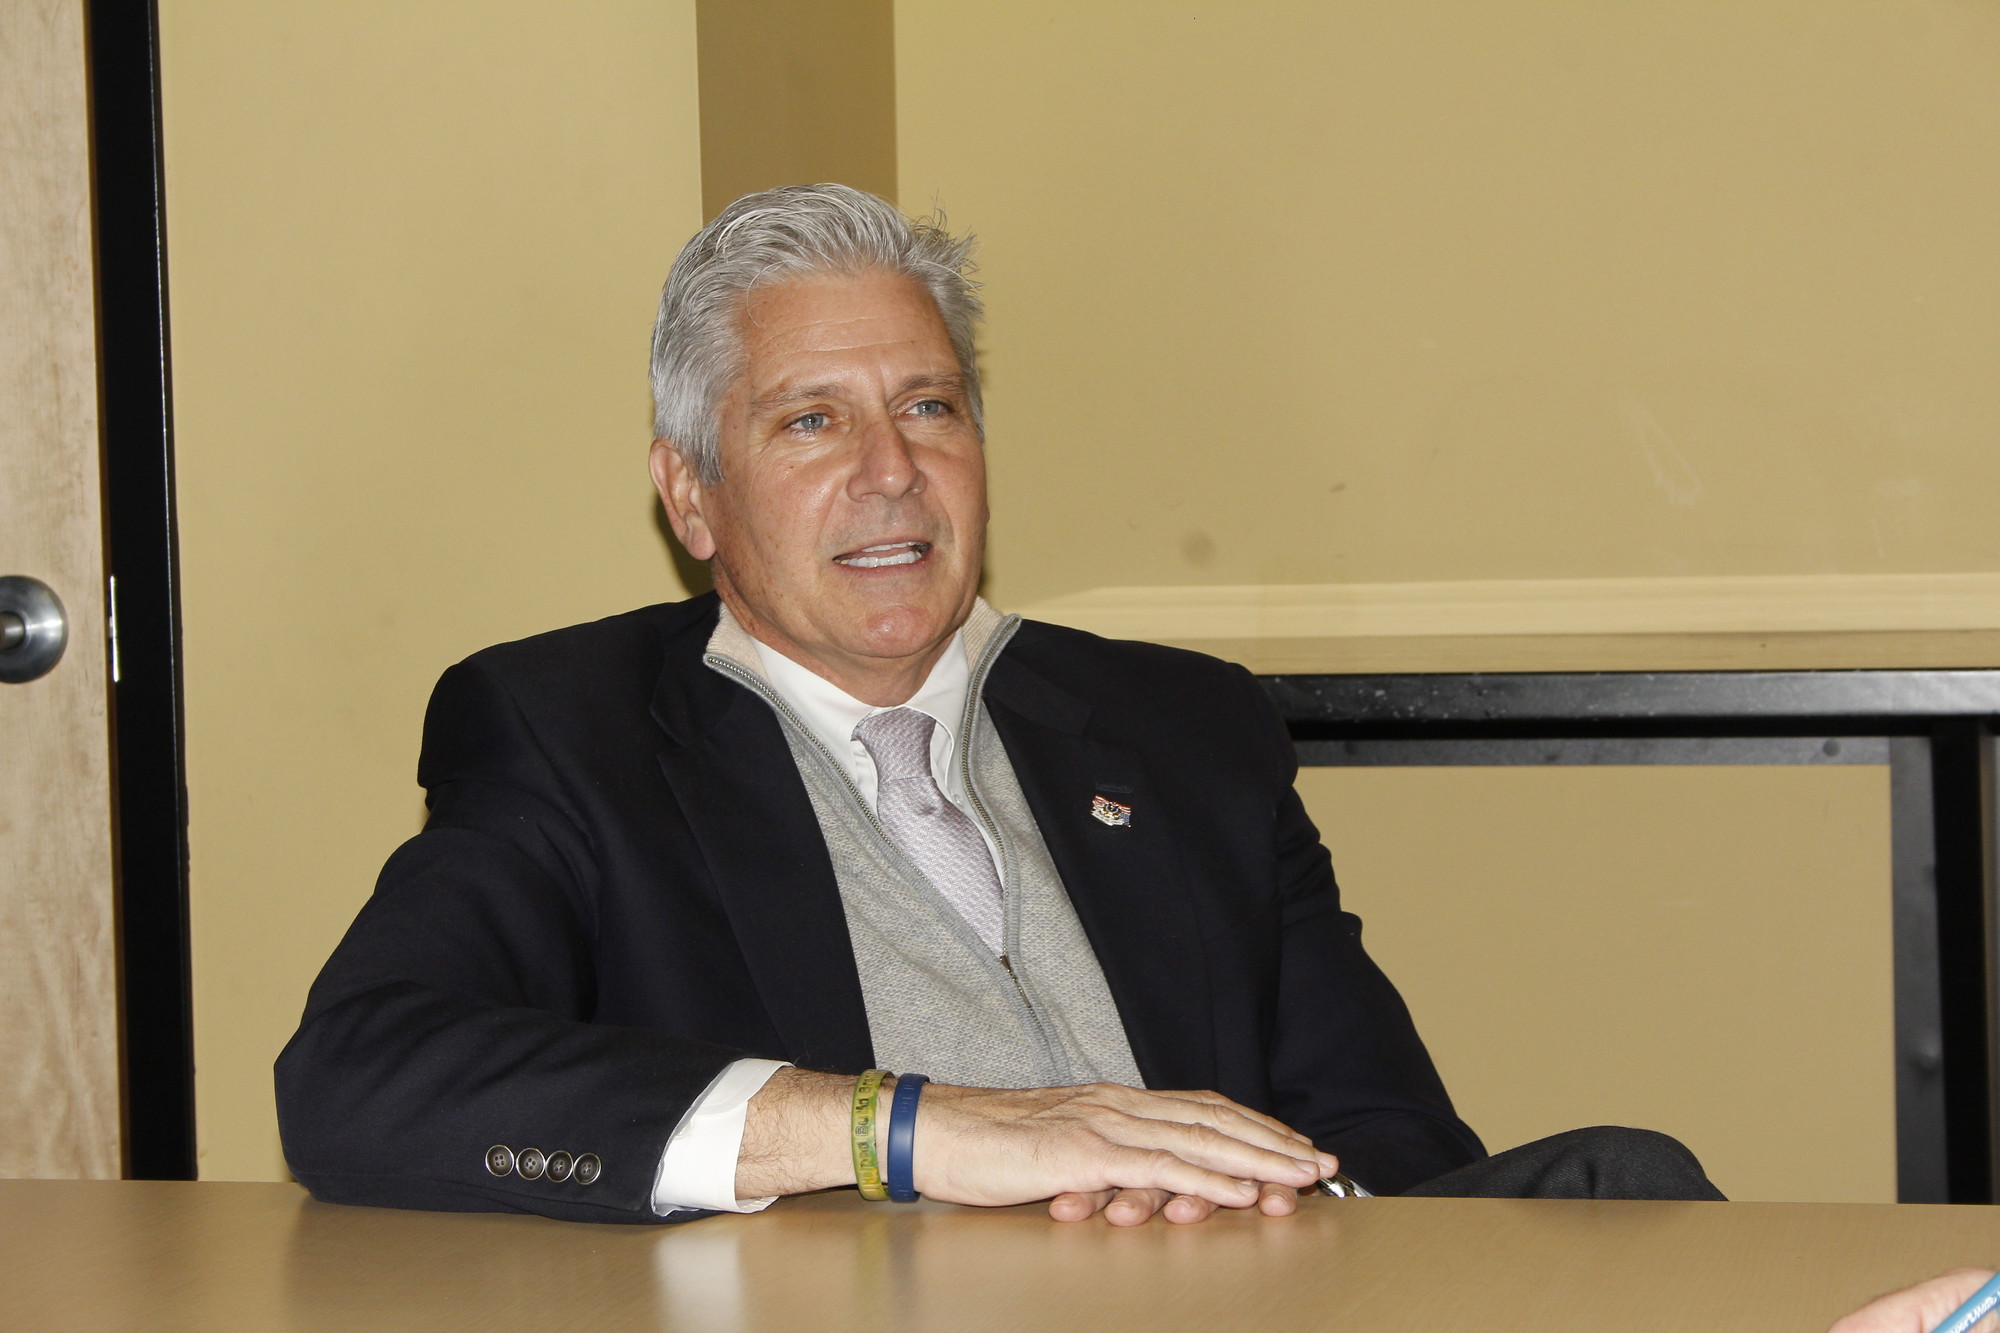 Newly appointed Town of Hempstead board member Bruce Blakeman said he would focus on retaining the town’s young people and repairing the Nassau Expressway.